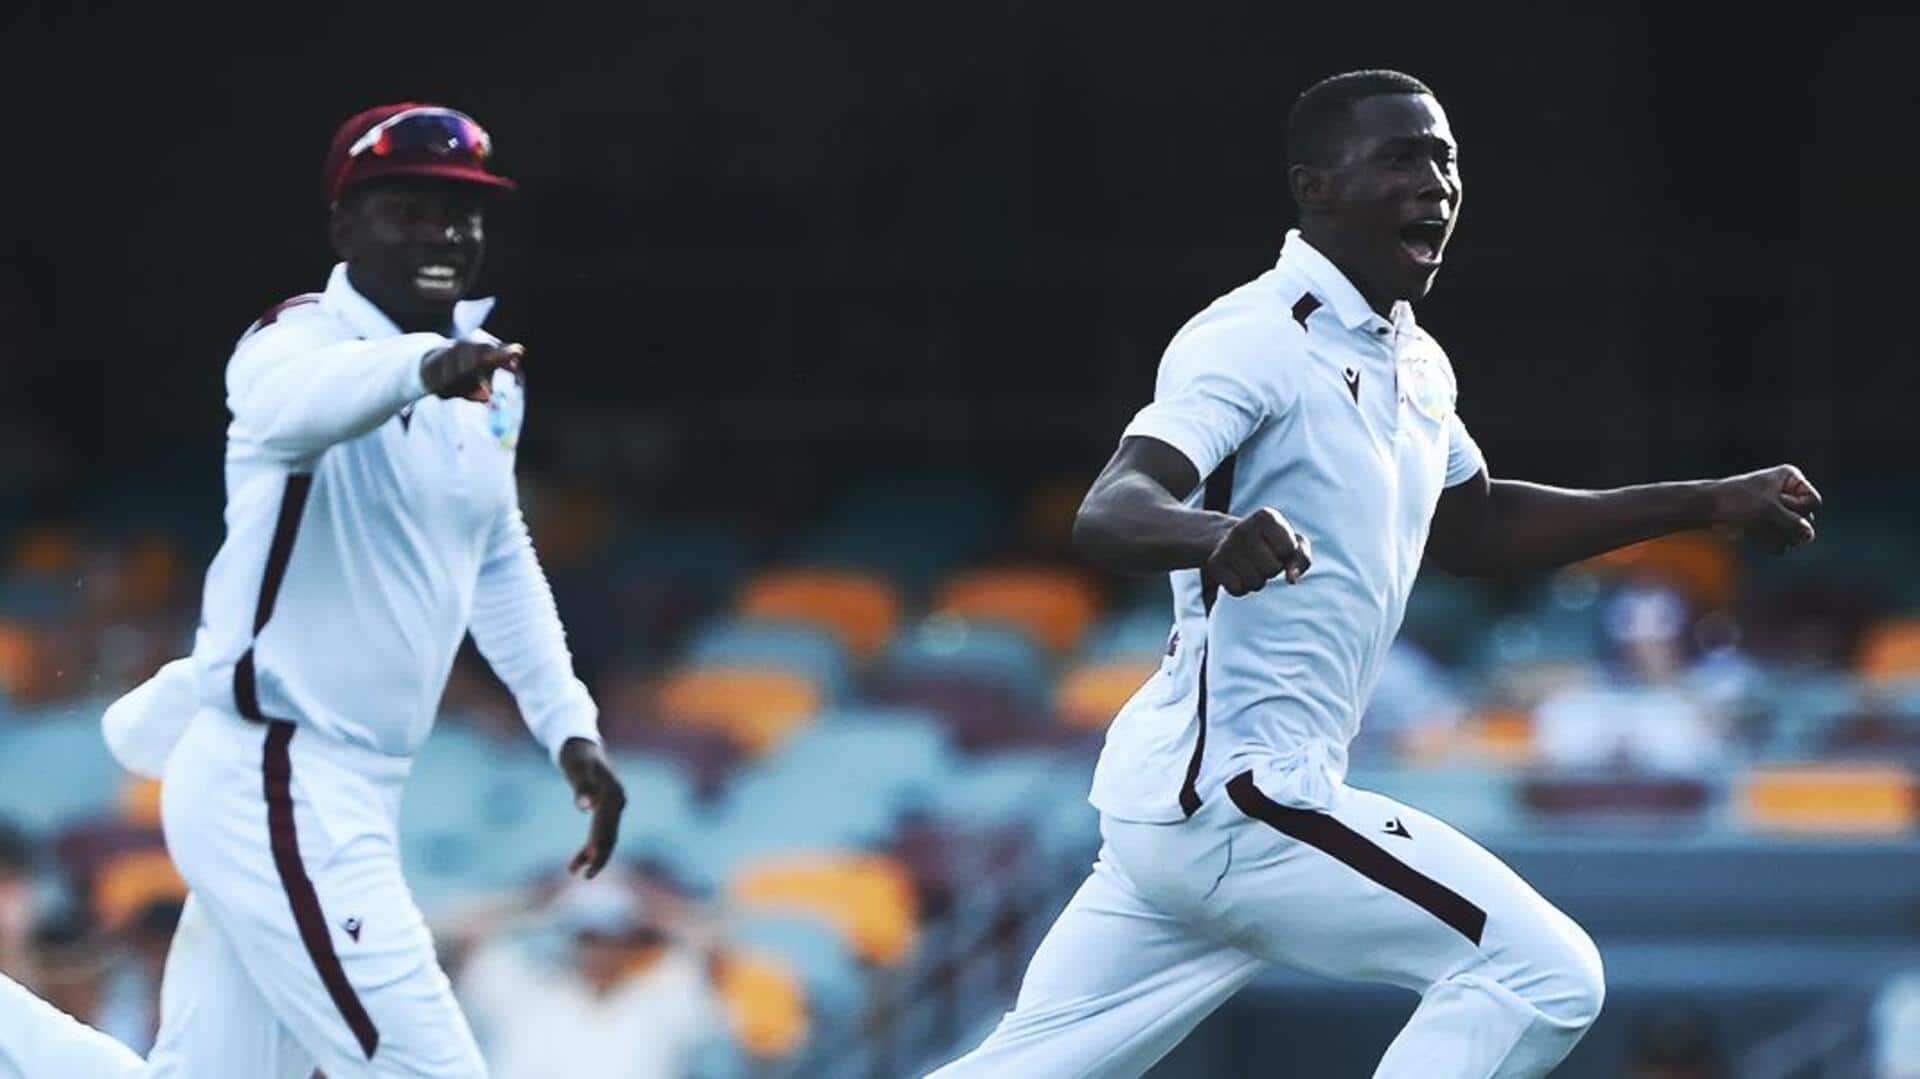 Decoding best bowling spells by WI bowlers in Australia (Tests)